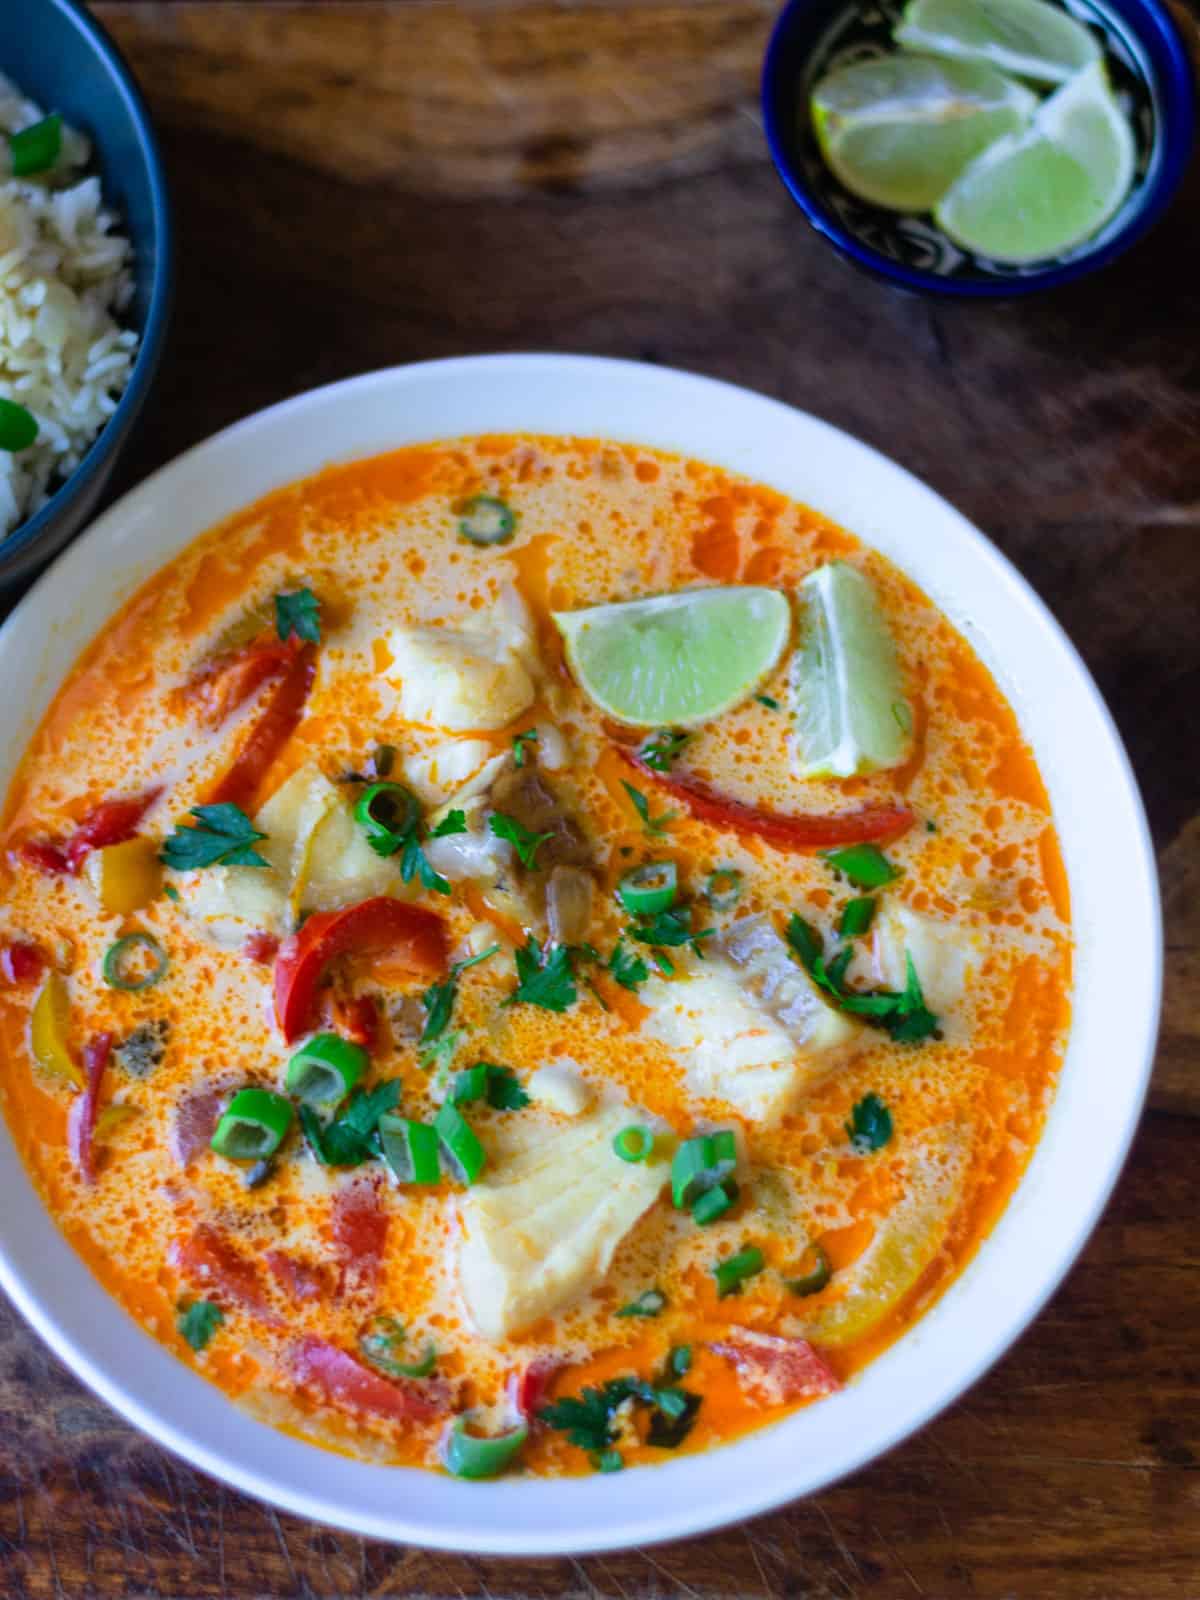 Brazilian fish stew, called moqueca is full of firm white fish that simmers in a coconut and tomato stew.